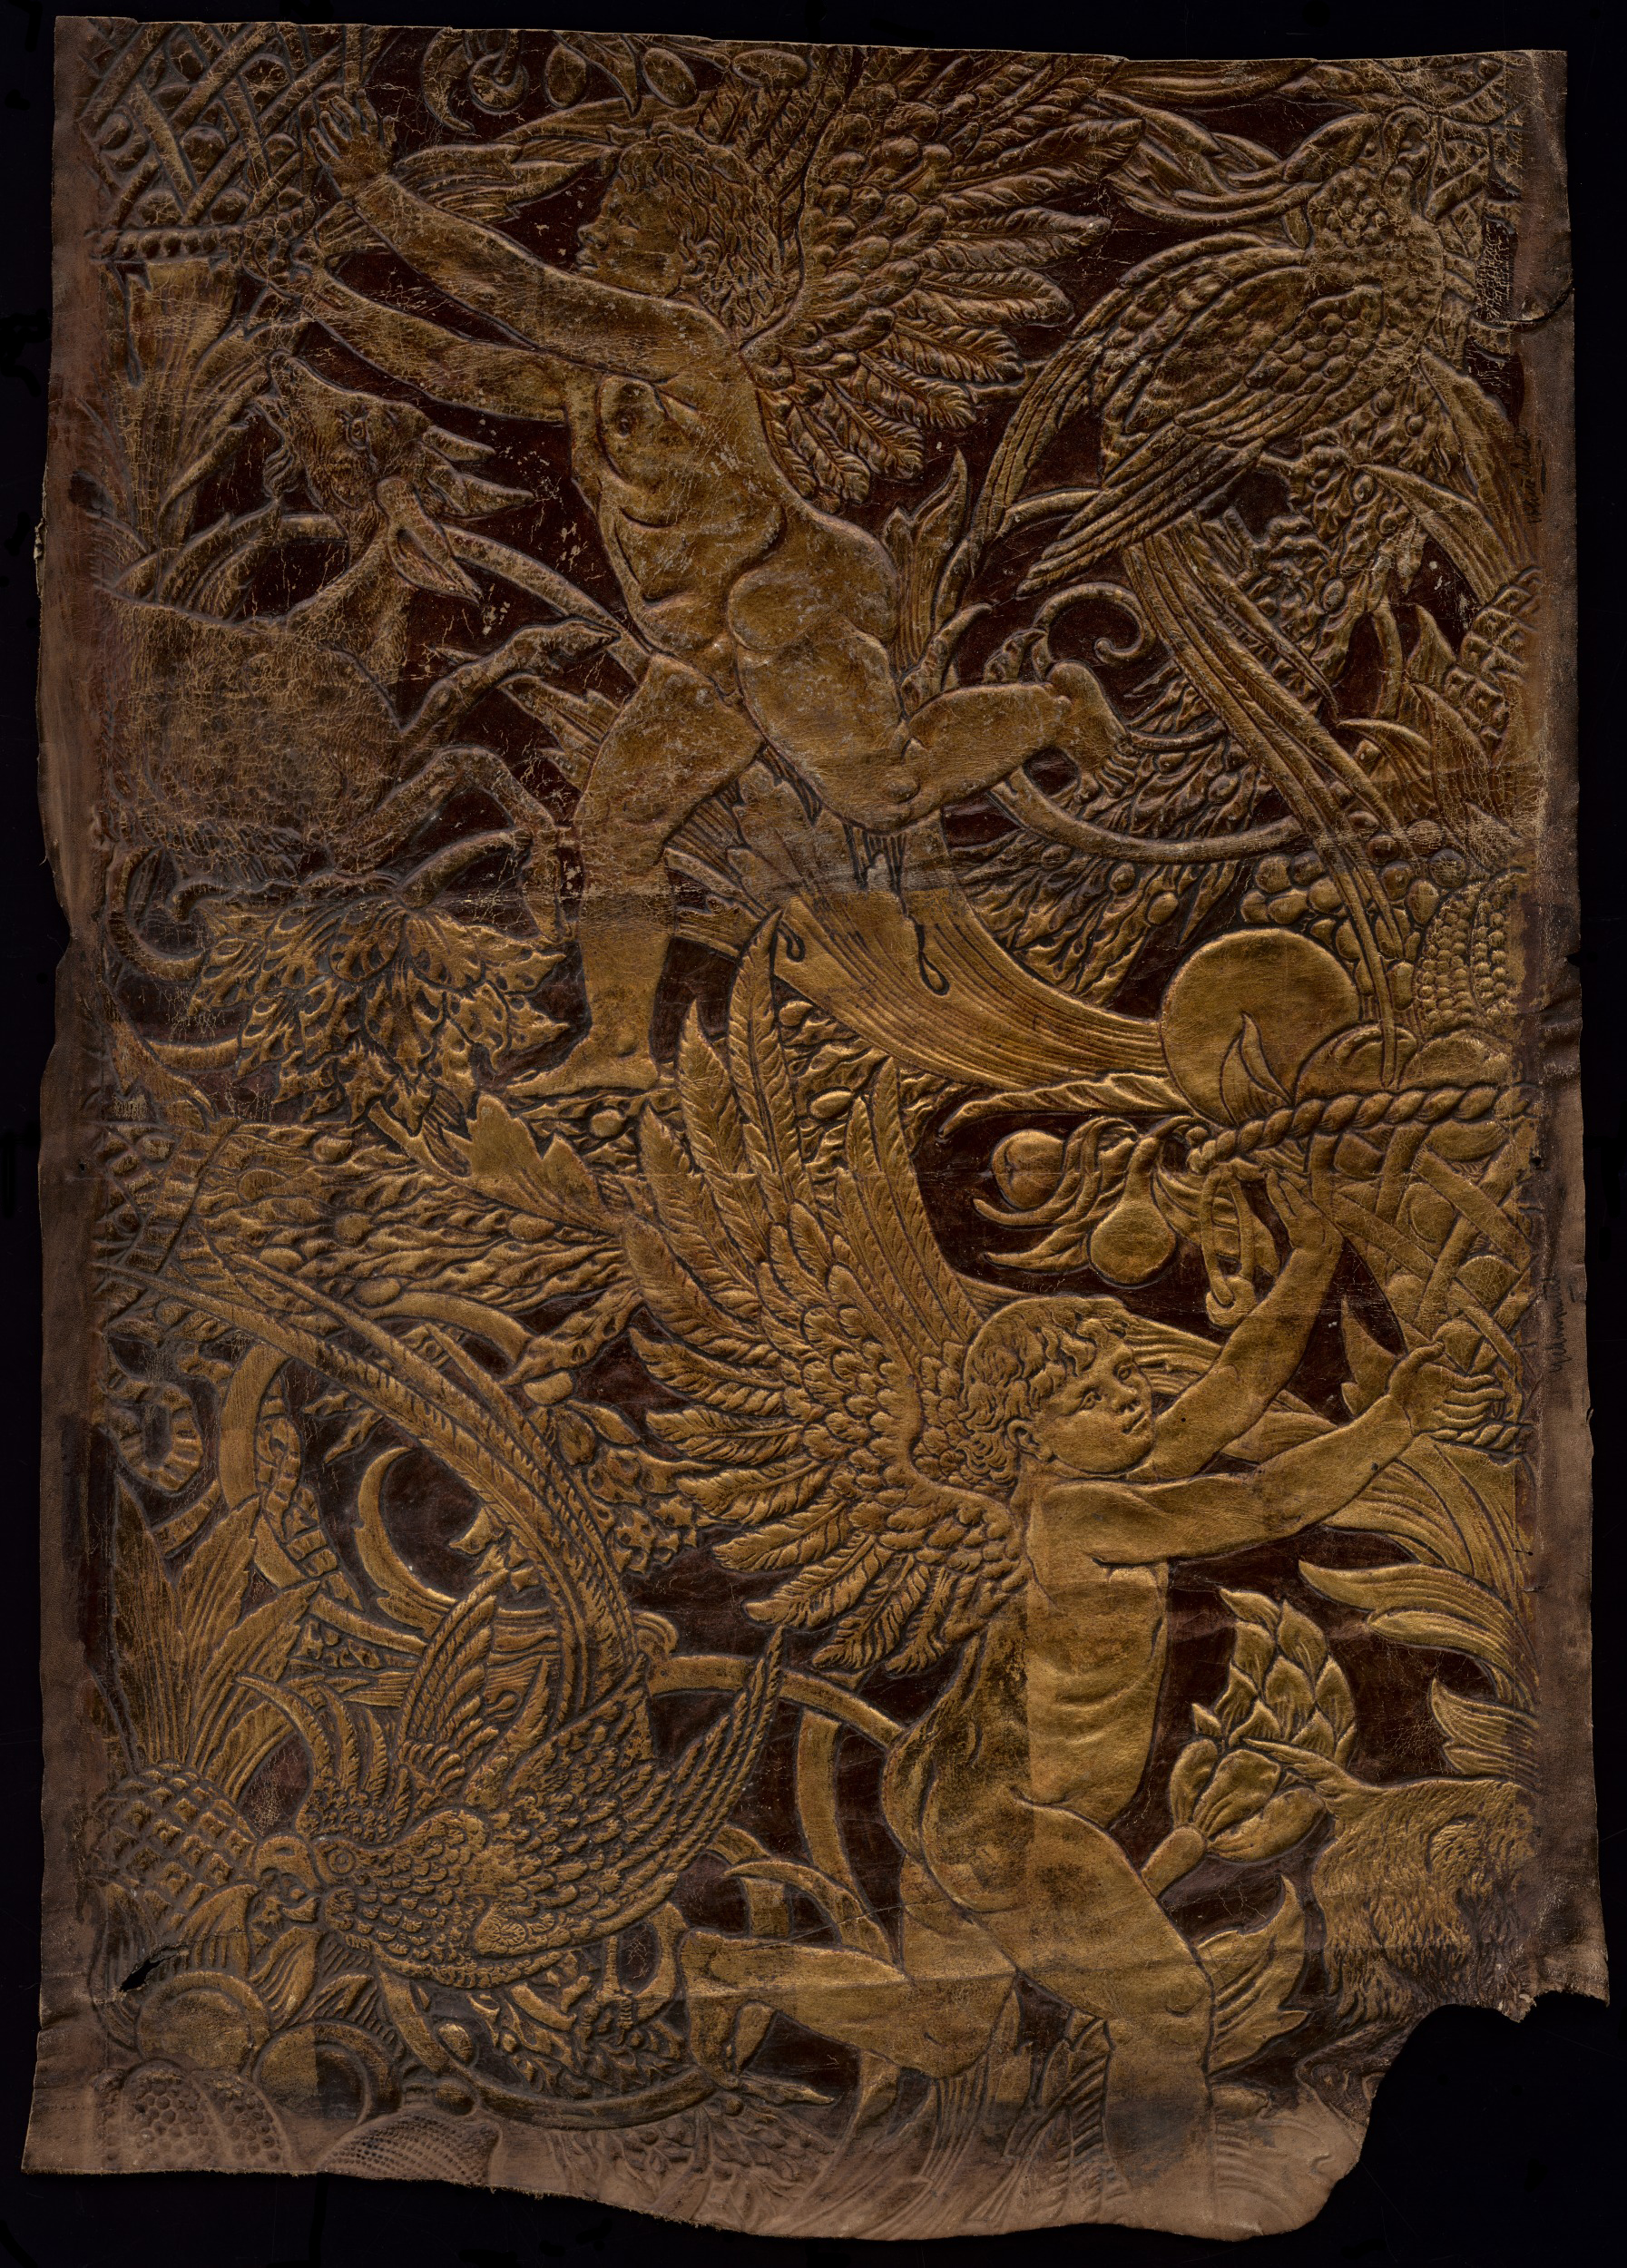 embossed leather with brown-and-gold lacquer, painted by Crane, 79.4 x 59.1 cm. Victoria and Albert Museum, London